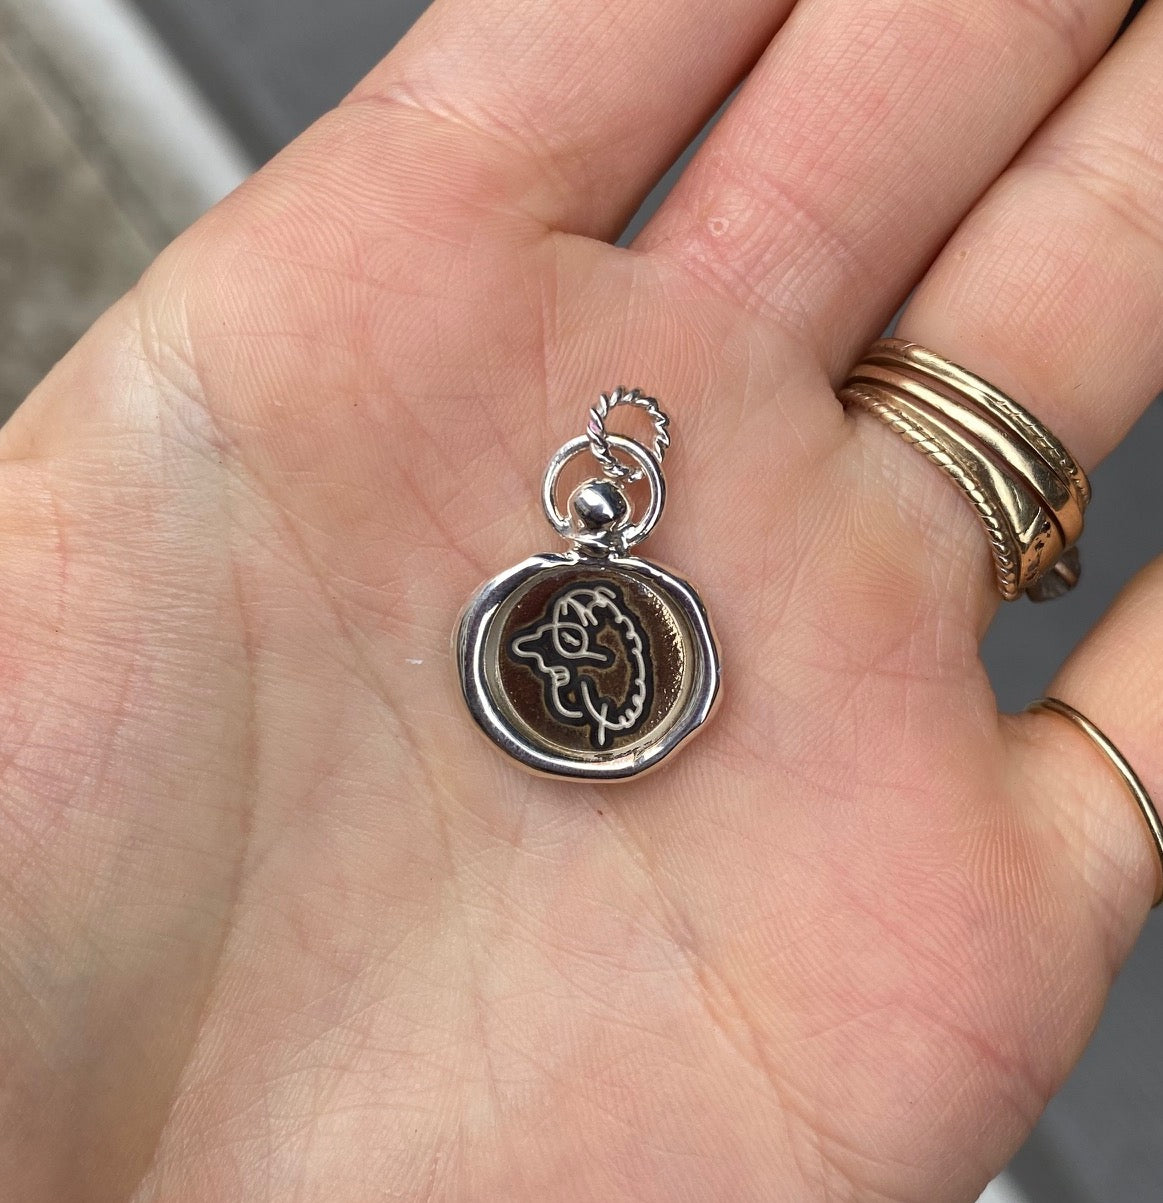 Design Your Own: Engraved Symbolic Charm